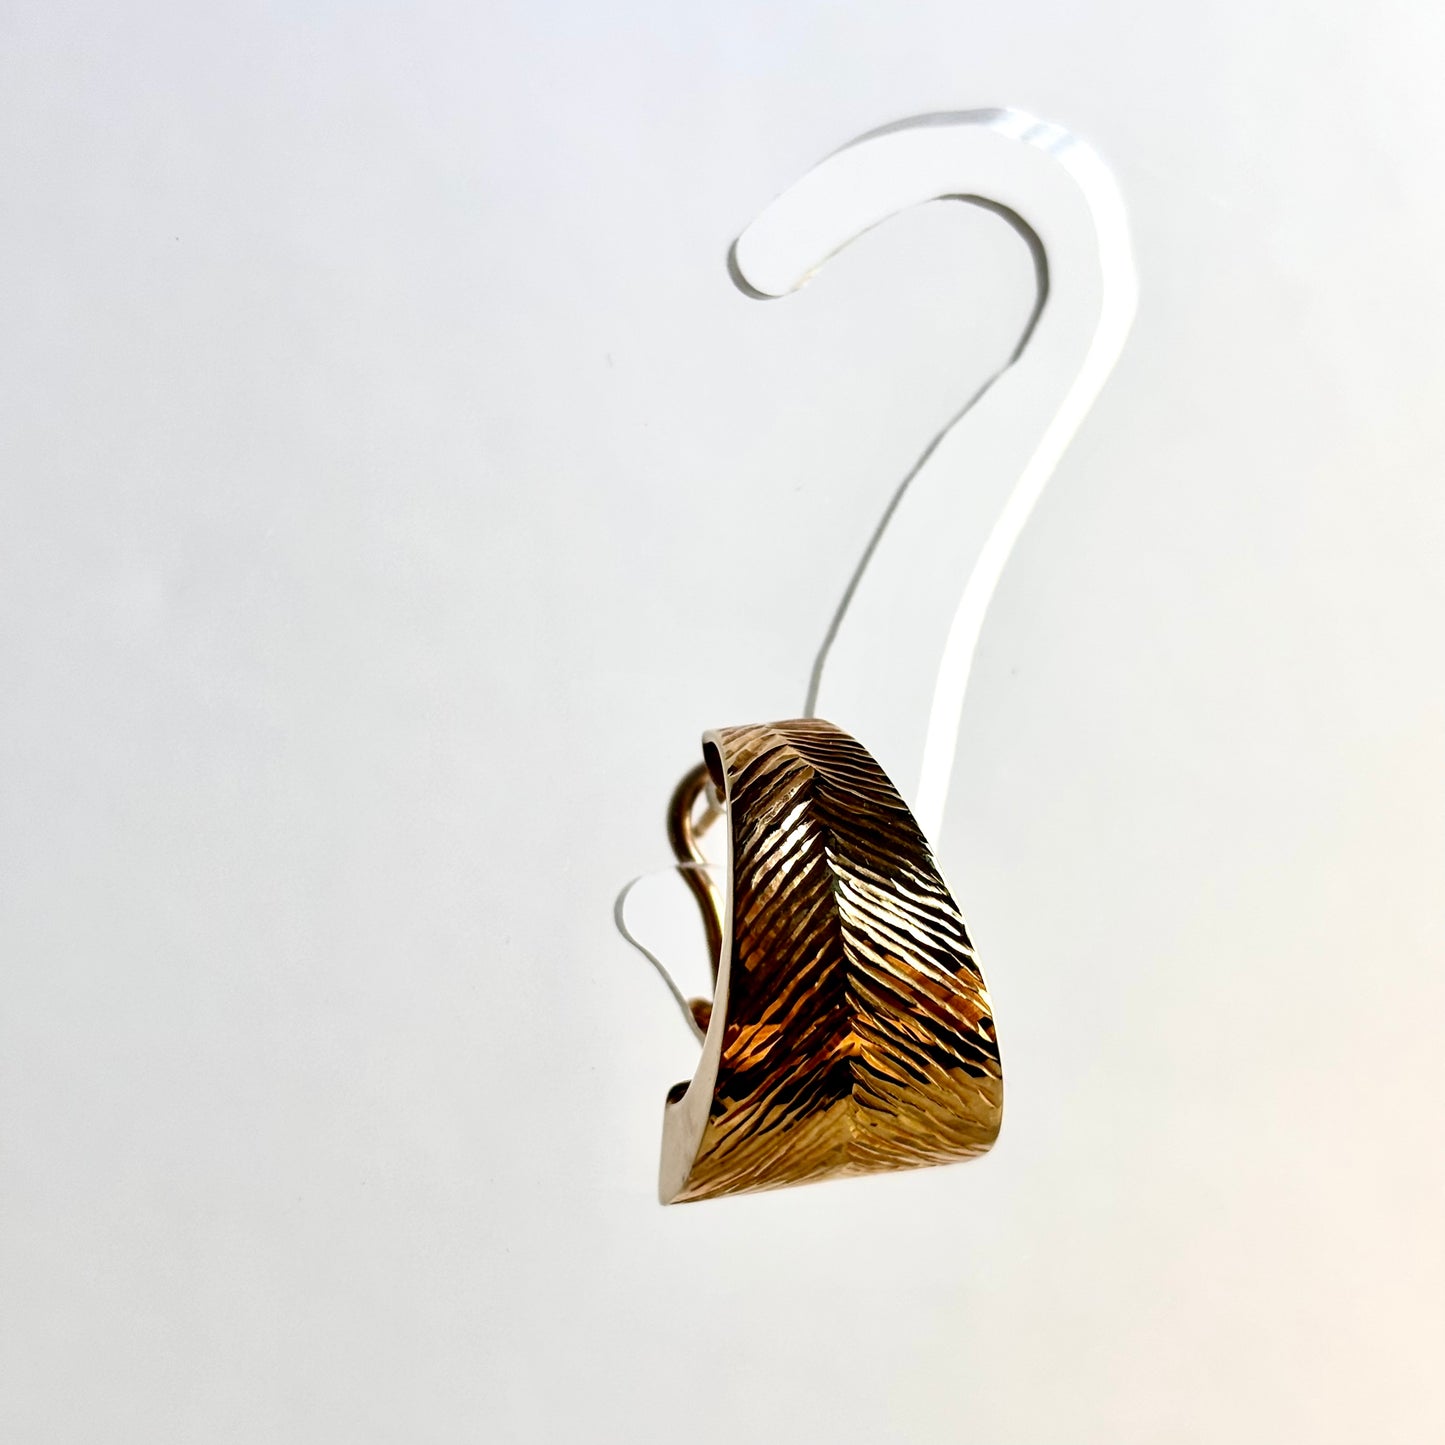 18k Solid Gold Lever back Earring in the shape of a Leaf